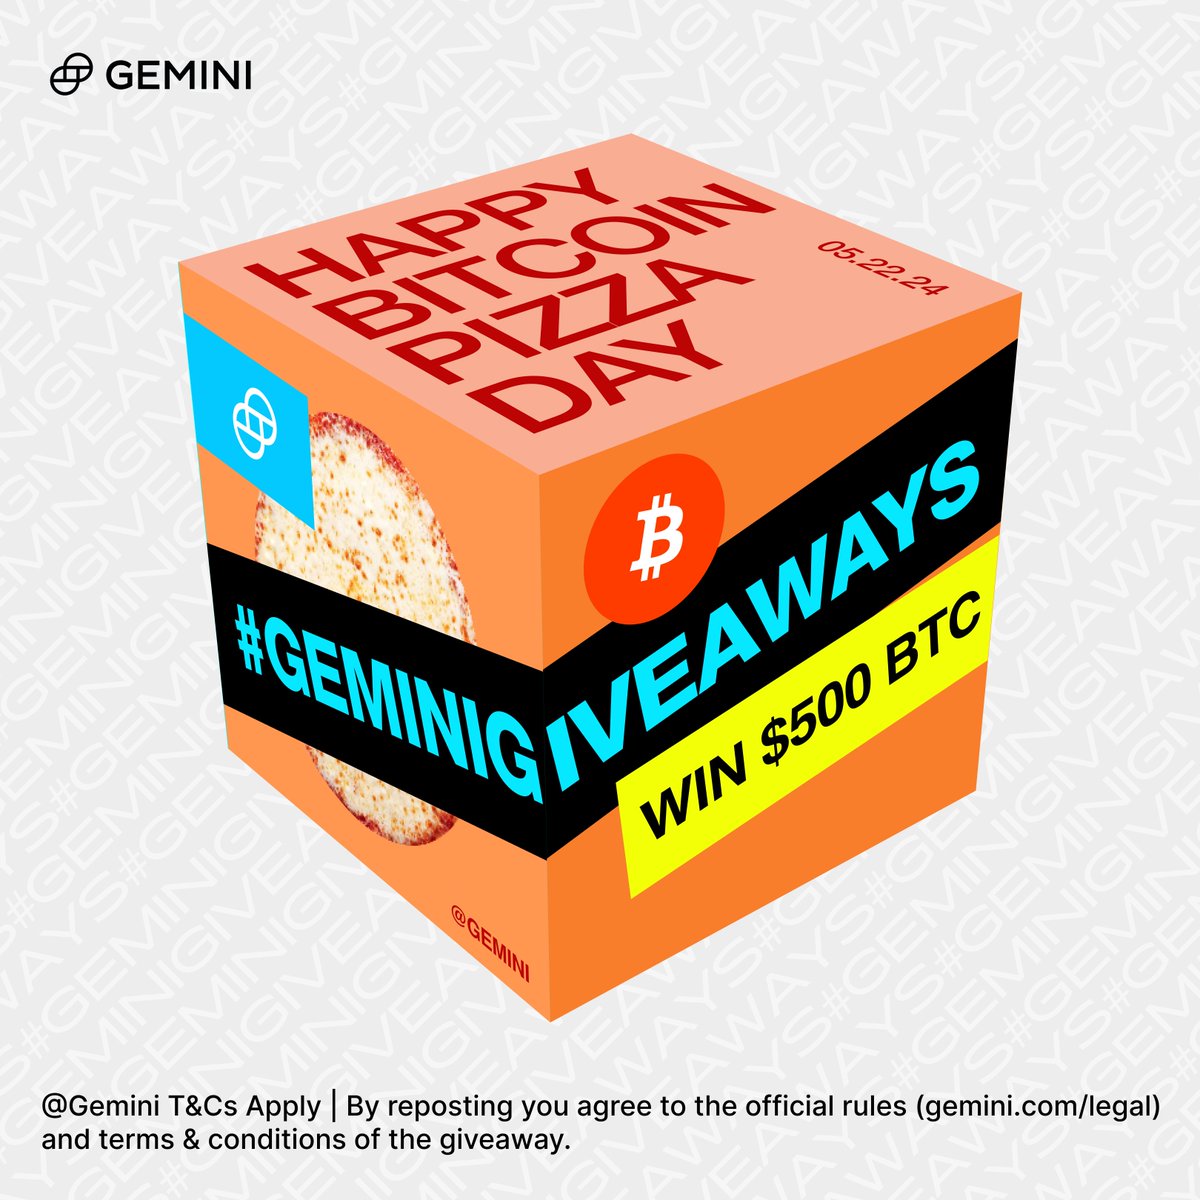 Welcome to #GeminiGiveaways✨ our new giveaway series. To celebrate Bitcoin Pizza Day, we’re giving away $500 in #BTC to 1 new or existing Gemini user 🍕 MUST follow the rules to enter: bit.ly/500BTCgg